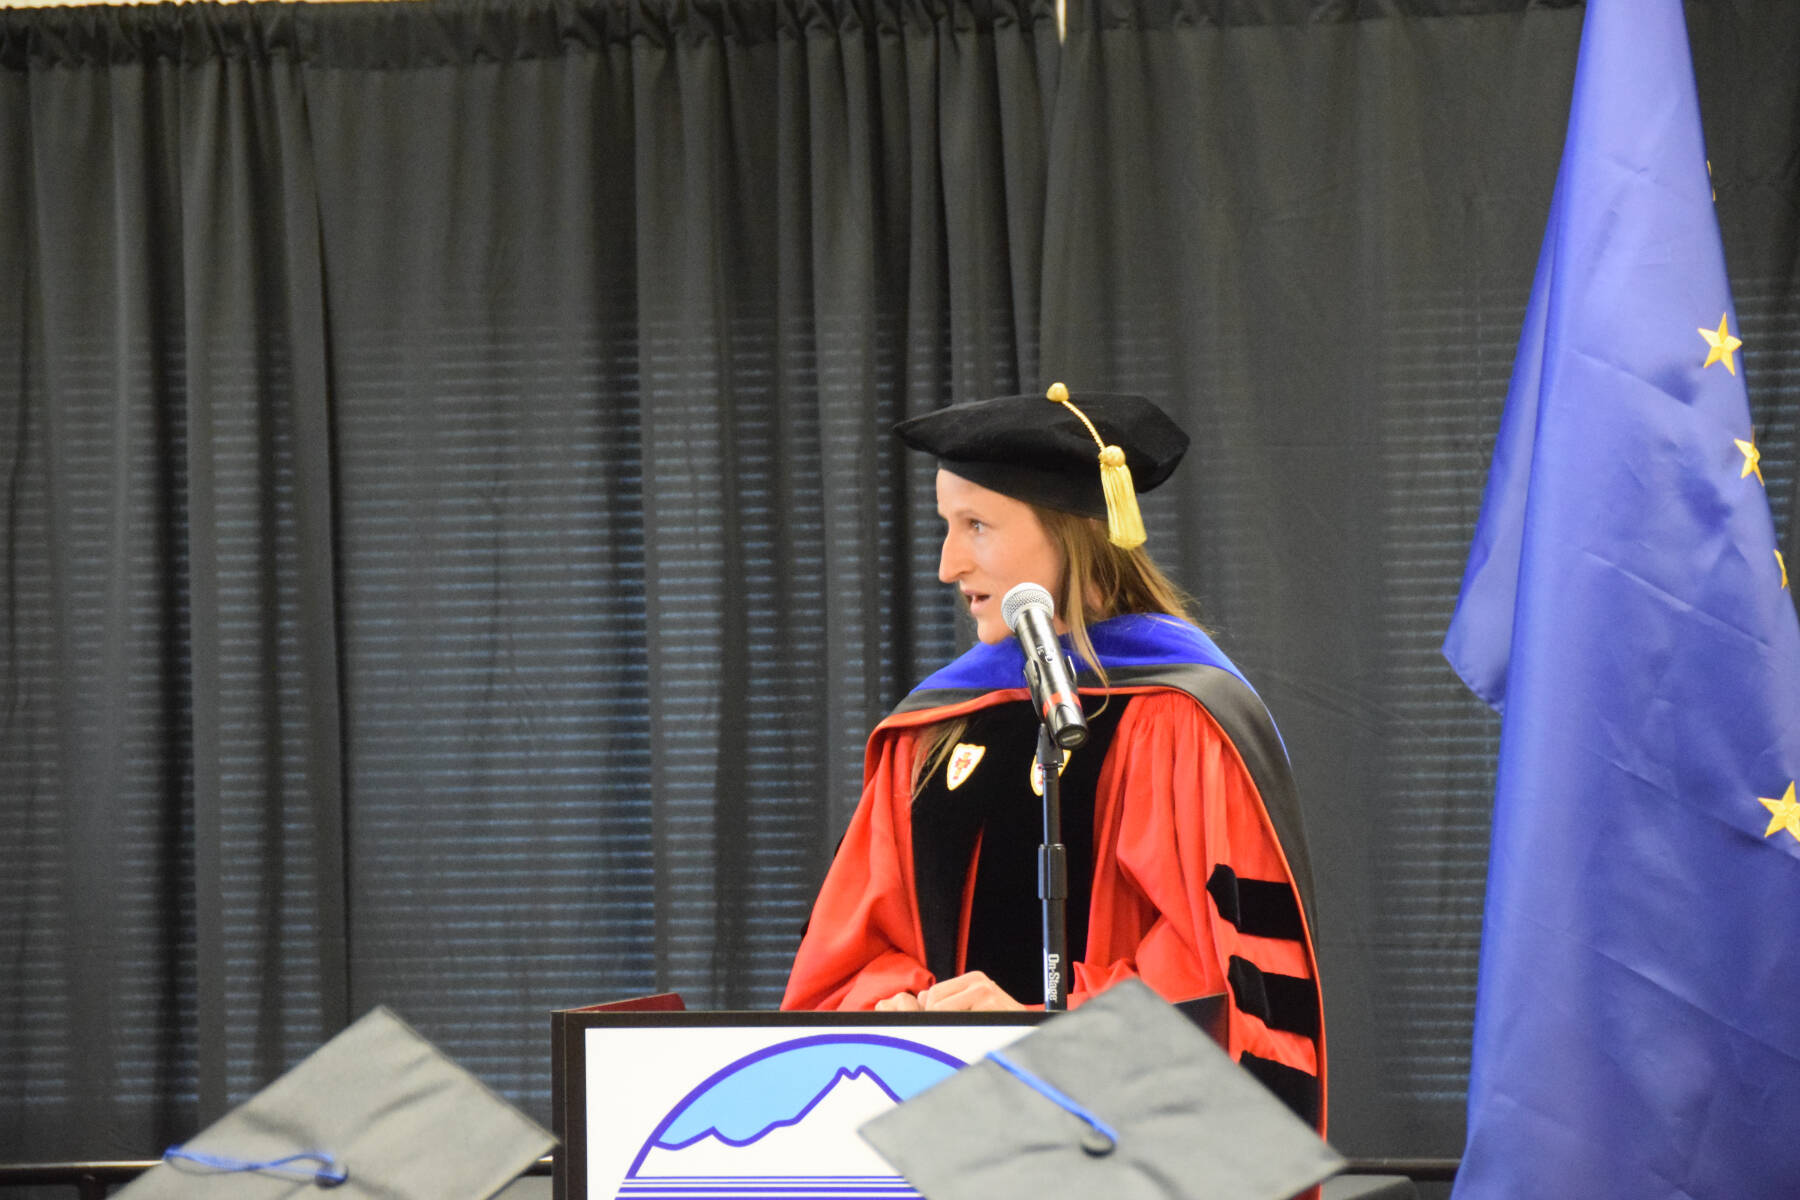 Kachemak Bay Campus Associate Professor of English Dr. Lia Calhoun gives her faculty reflection address during the 2023 KBC Commencement on Wednesday, May 10, 2023, in Homer, Alaska. (Photo by Delcenia Cosman/Homer News)